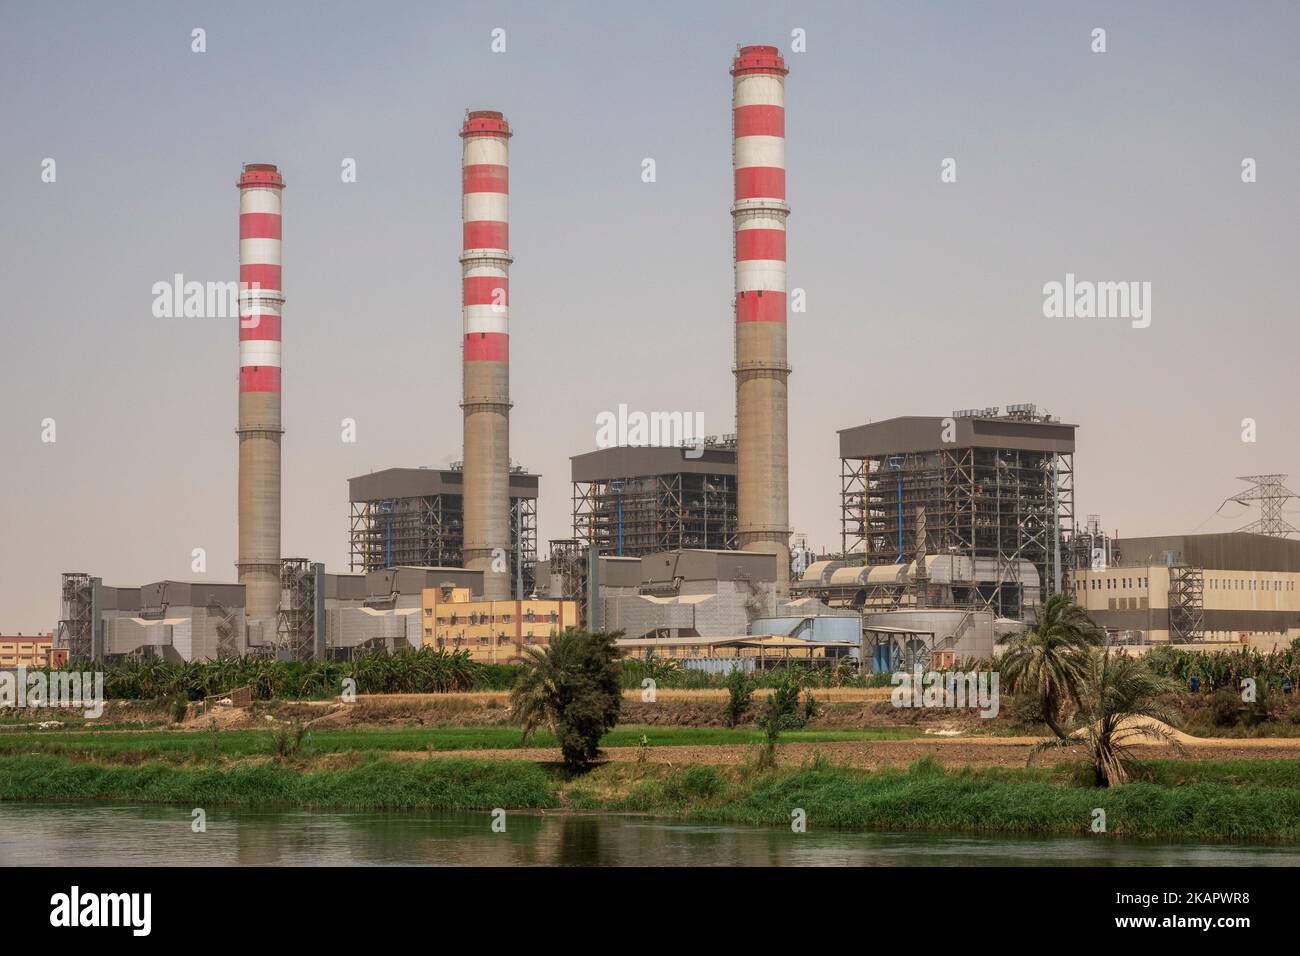 Three industrial chimneys on the banks of the river Nile, Egypt Stock Photo